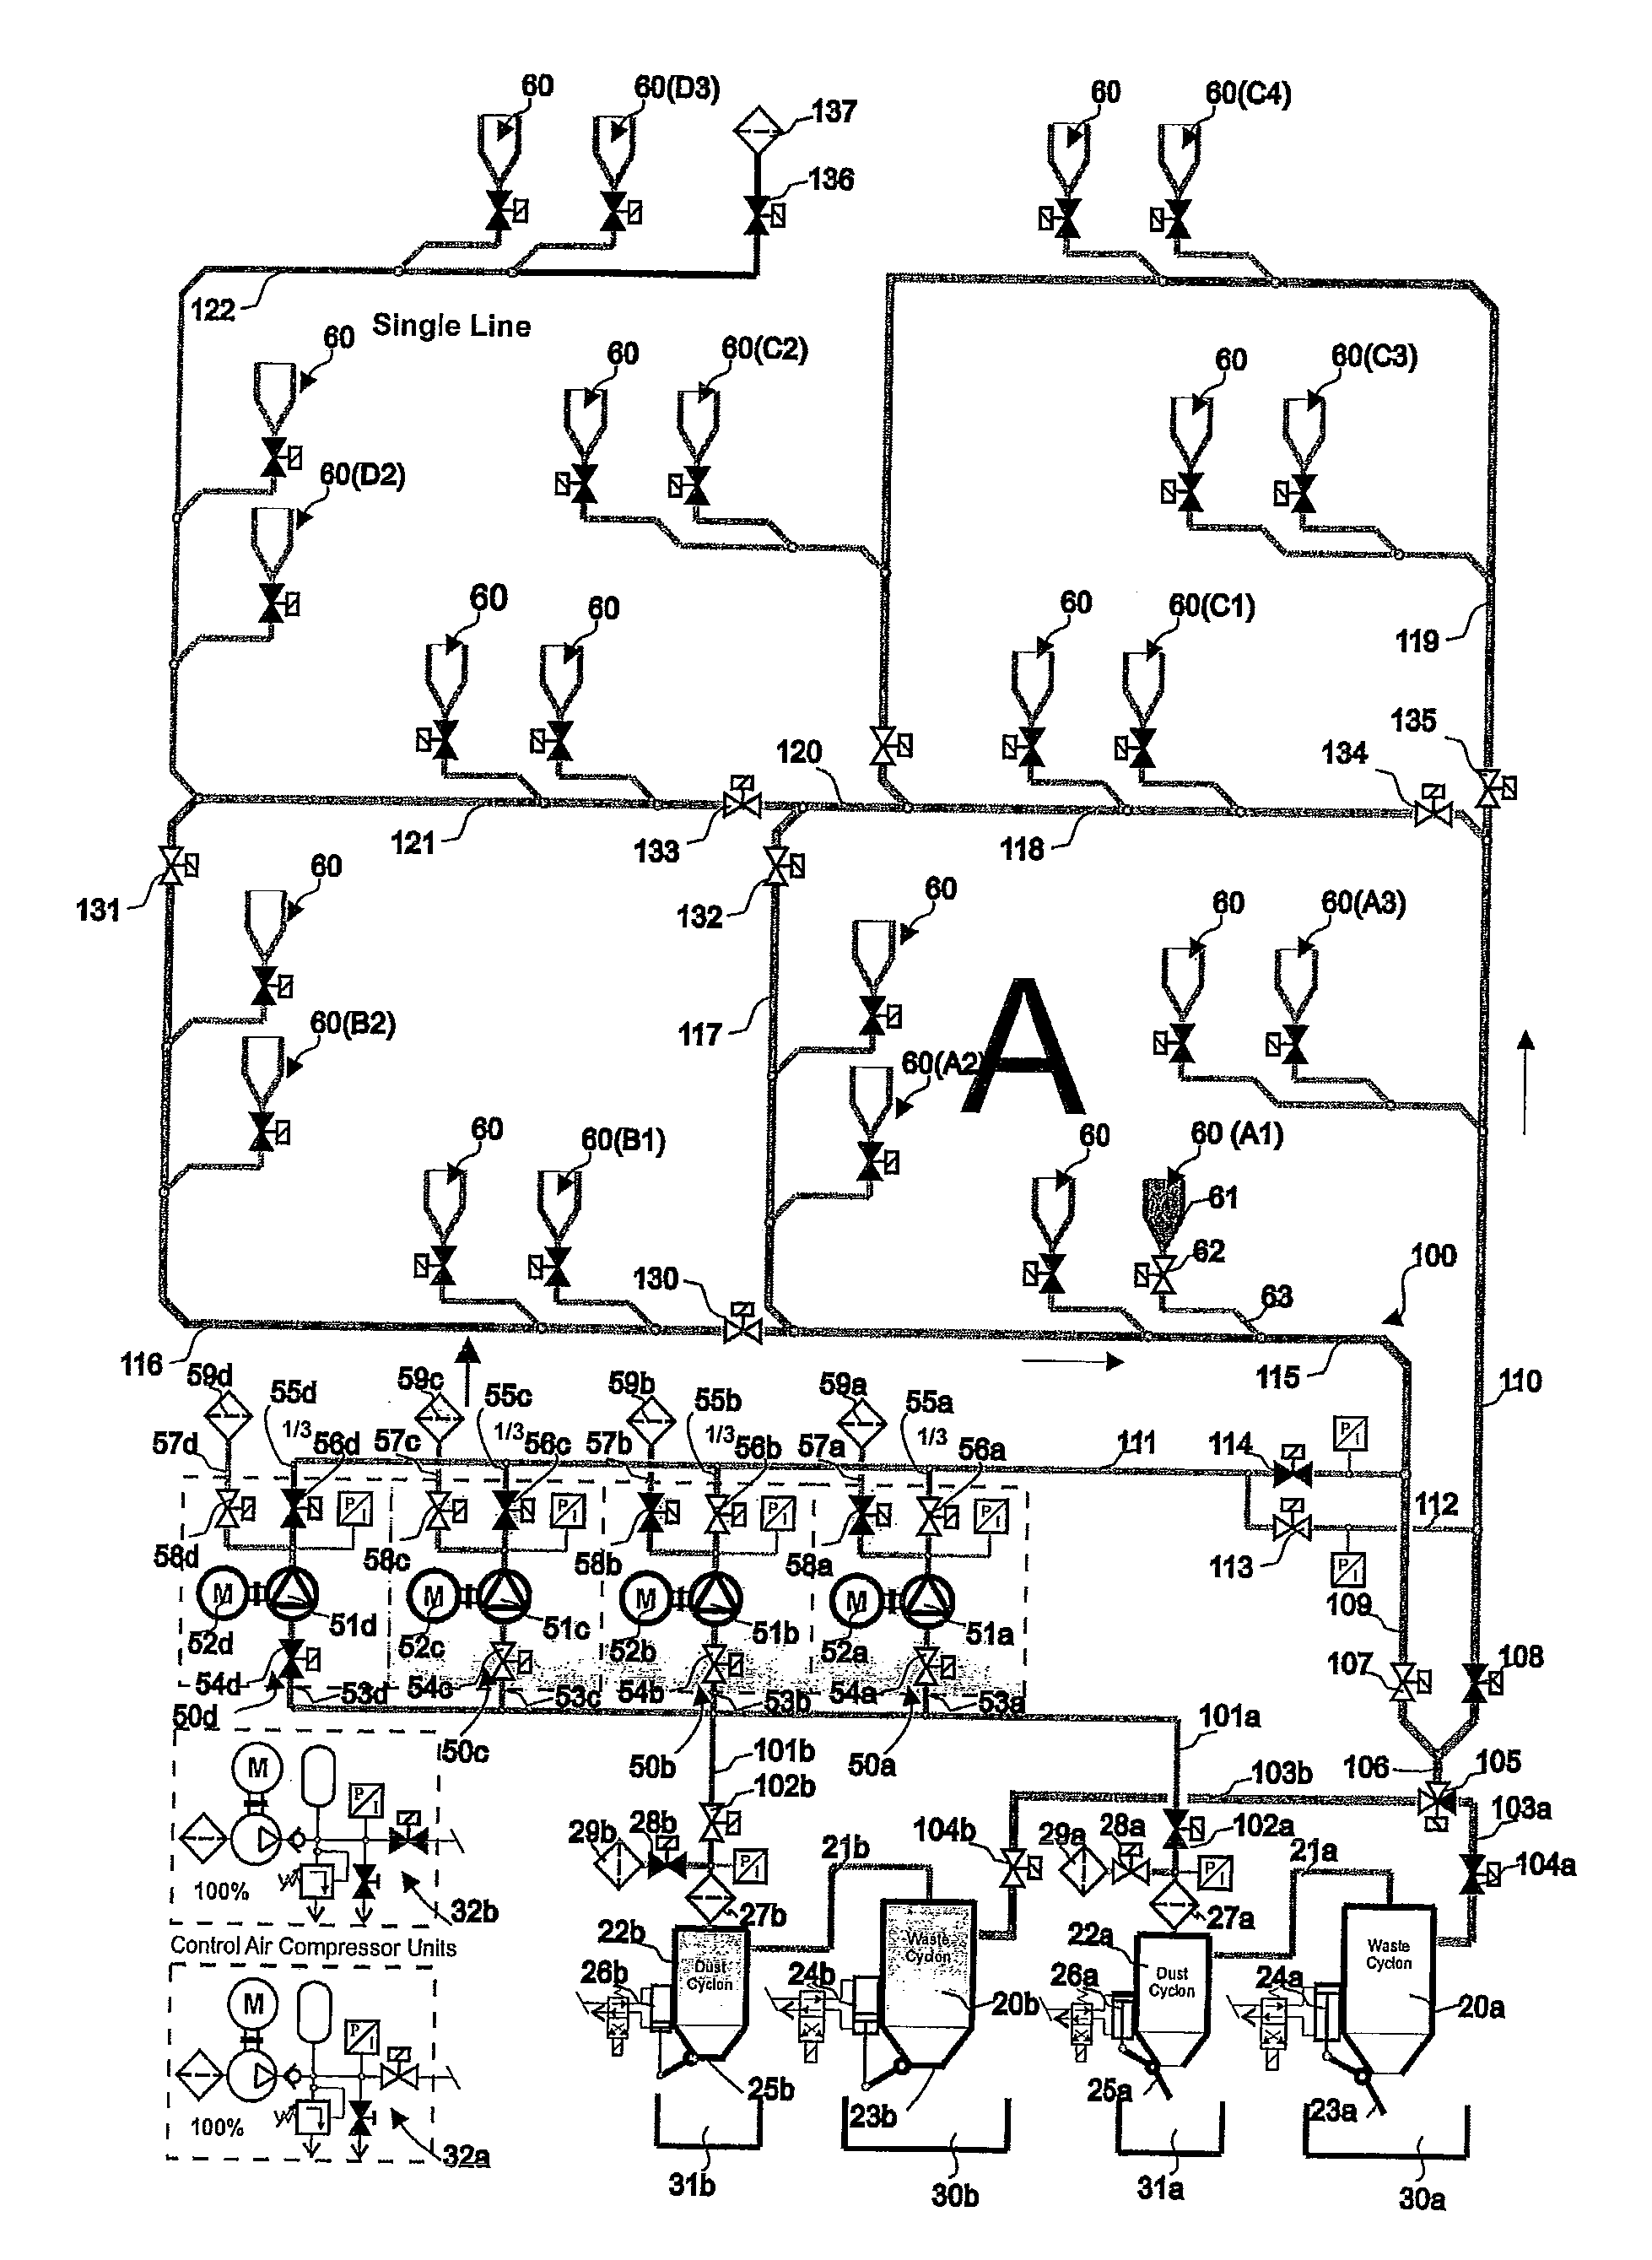 Method and apparatus in a pneumatic materials moving system